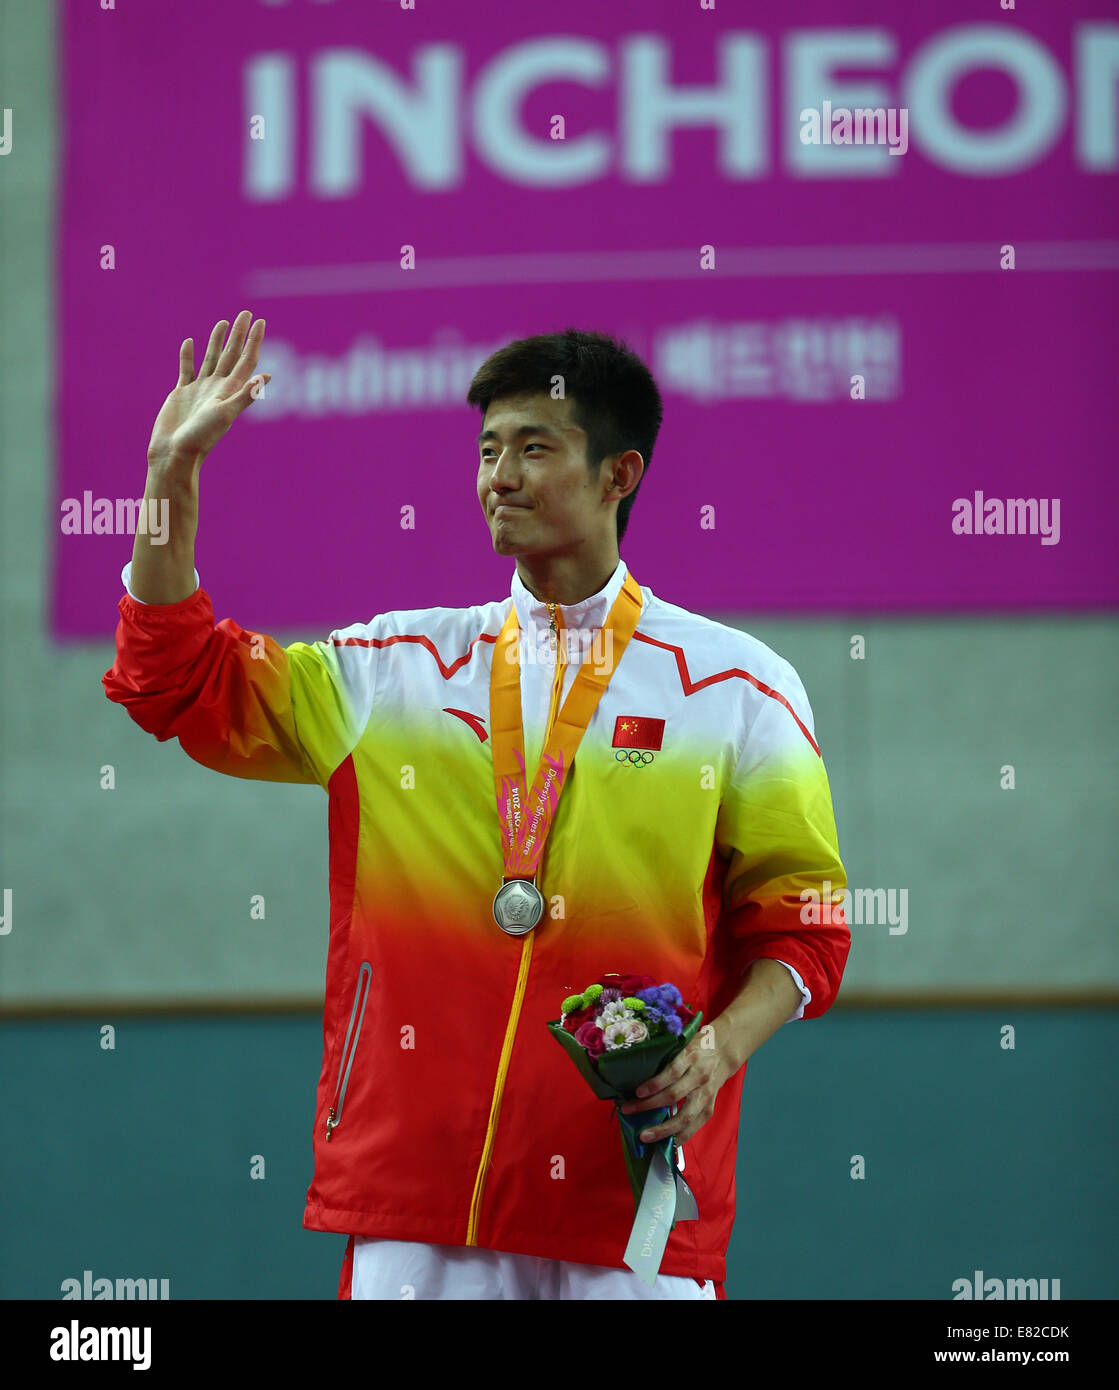 Incheon, South Korea. 29th Sep, 2014. Silver medalist Chen Long of China poses during the awarding ceremony of the men's singles contest of badminton at the 17th Asian Games in Incheon, South Korea, Sept. 29, 2014. © Fei Maohua/Xinhua/Alamy Live News Stock Photo